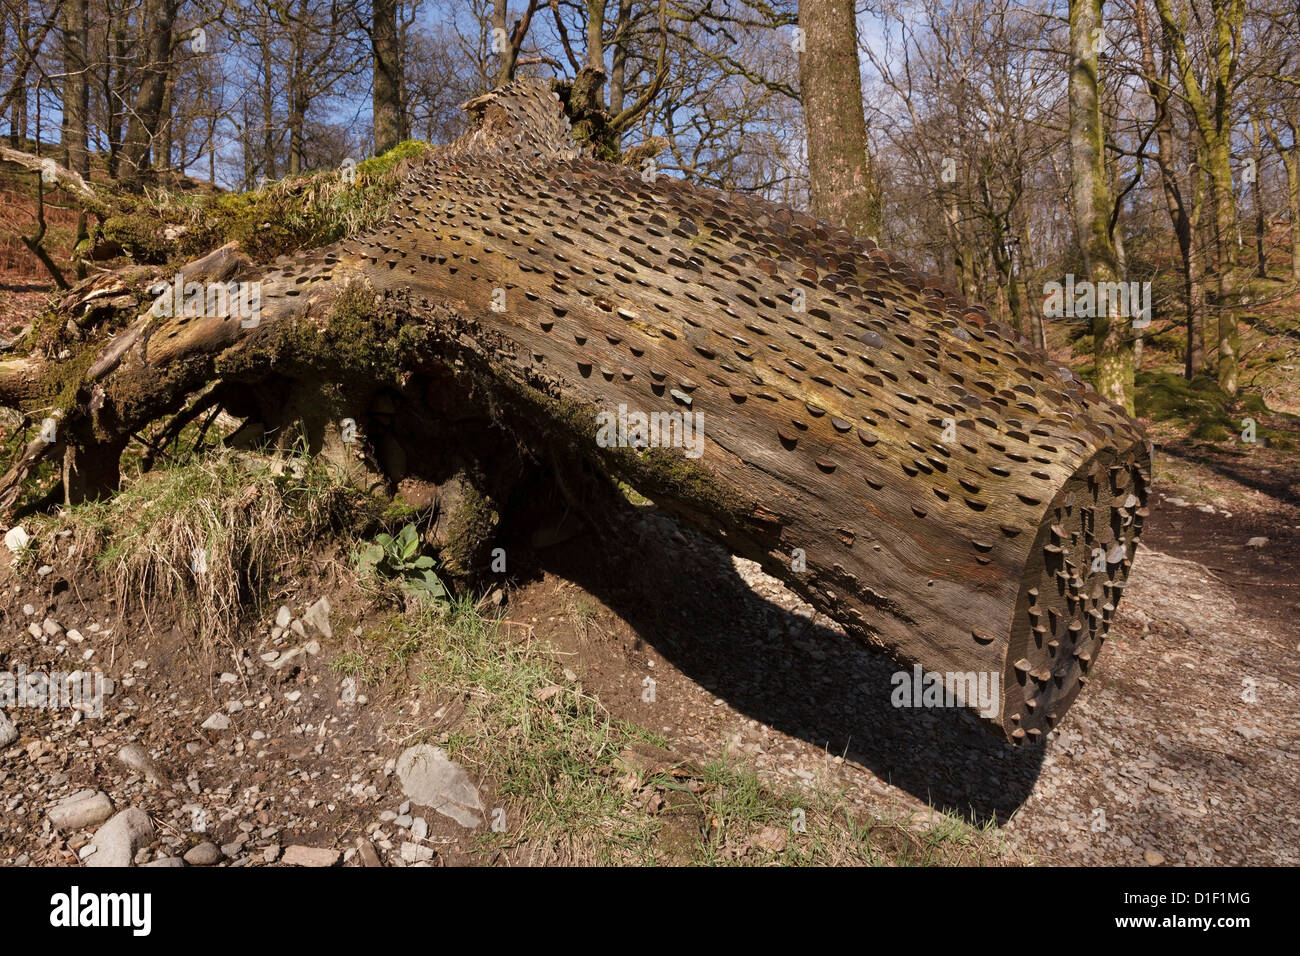 Money tree - old fallen tree trunk covered in coins which have been hammered in for Good Luck, Elterwater, Cumbria, England, UK Stock Photo